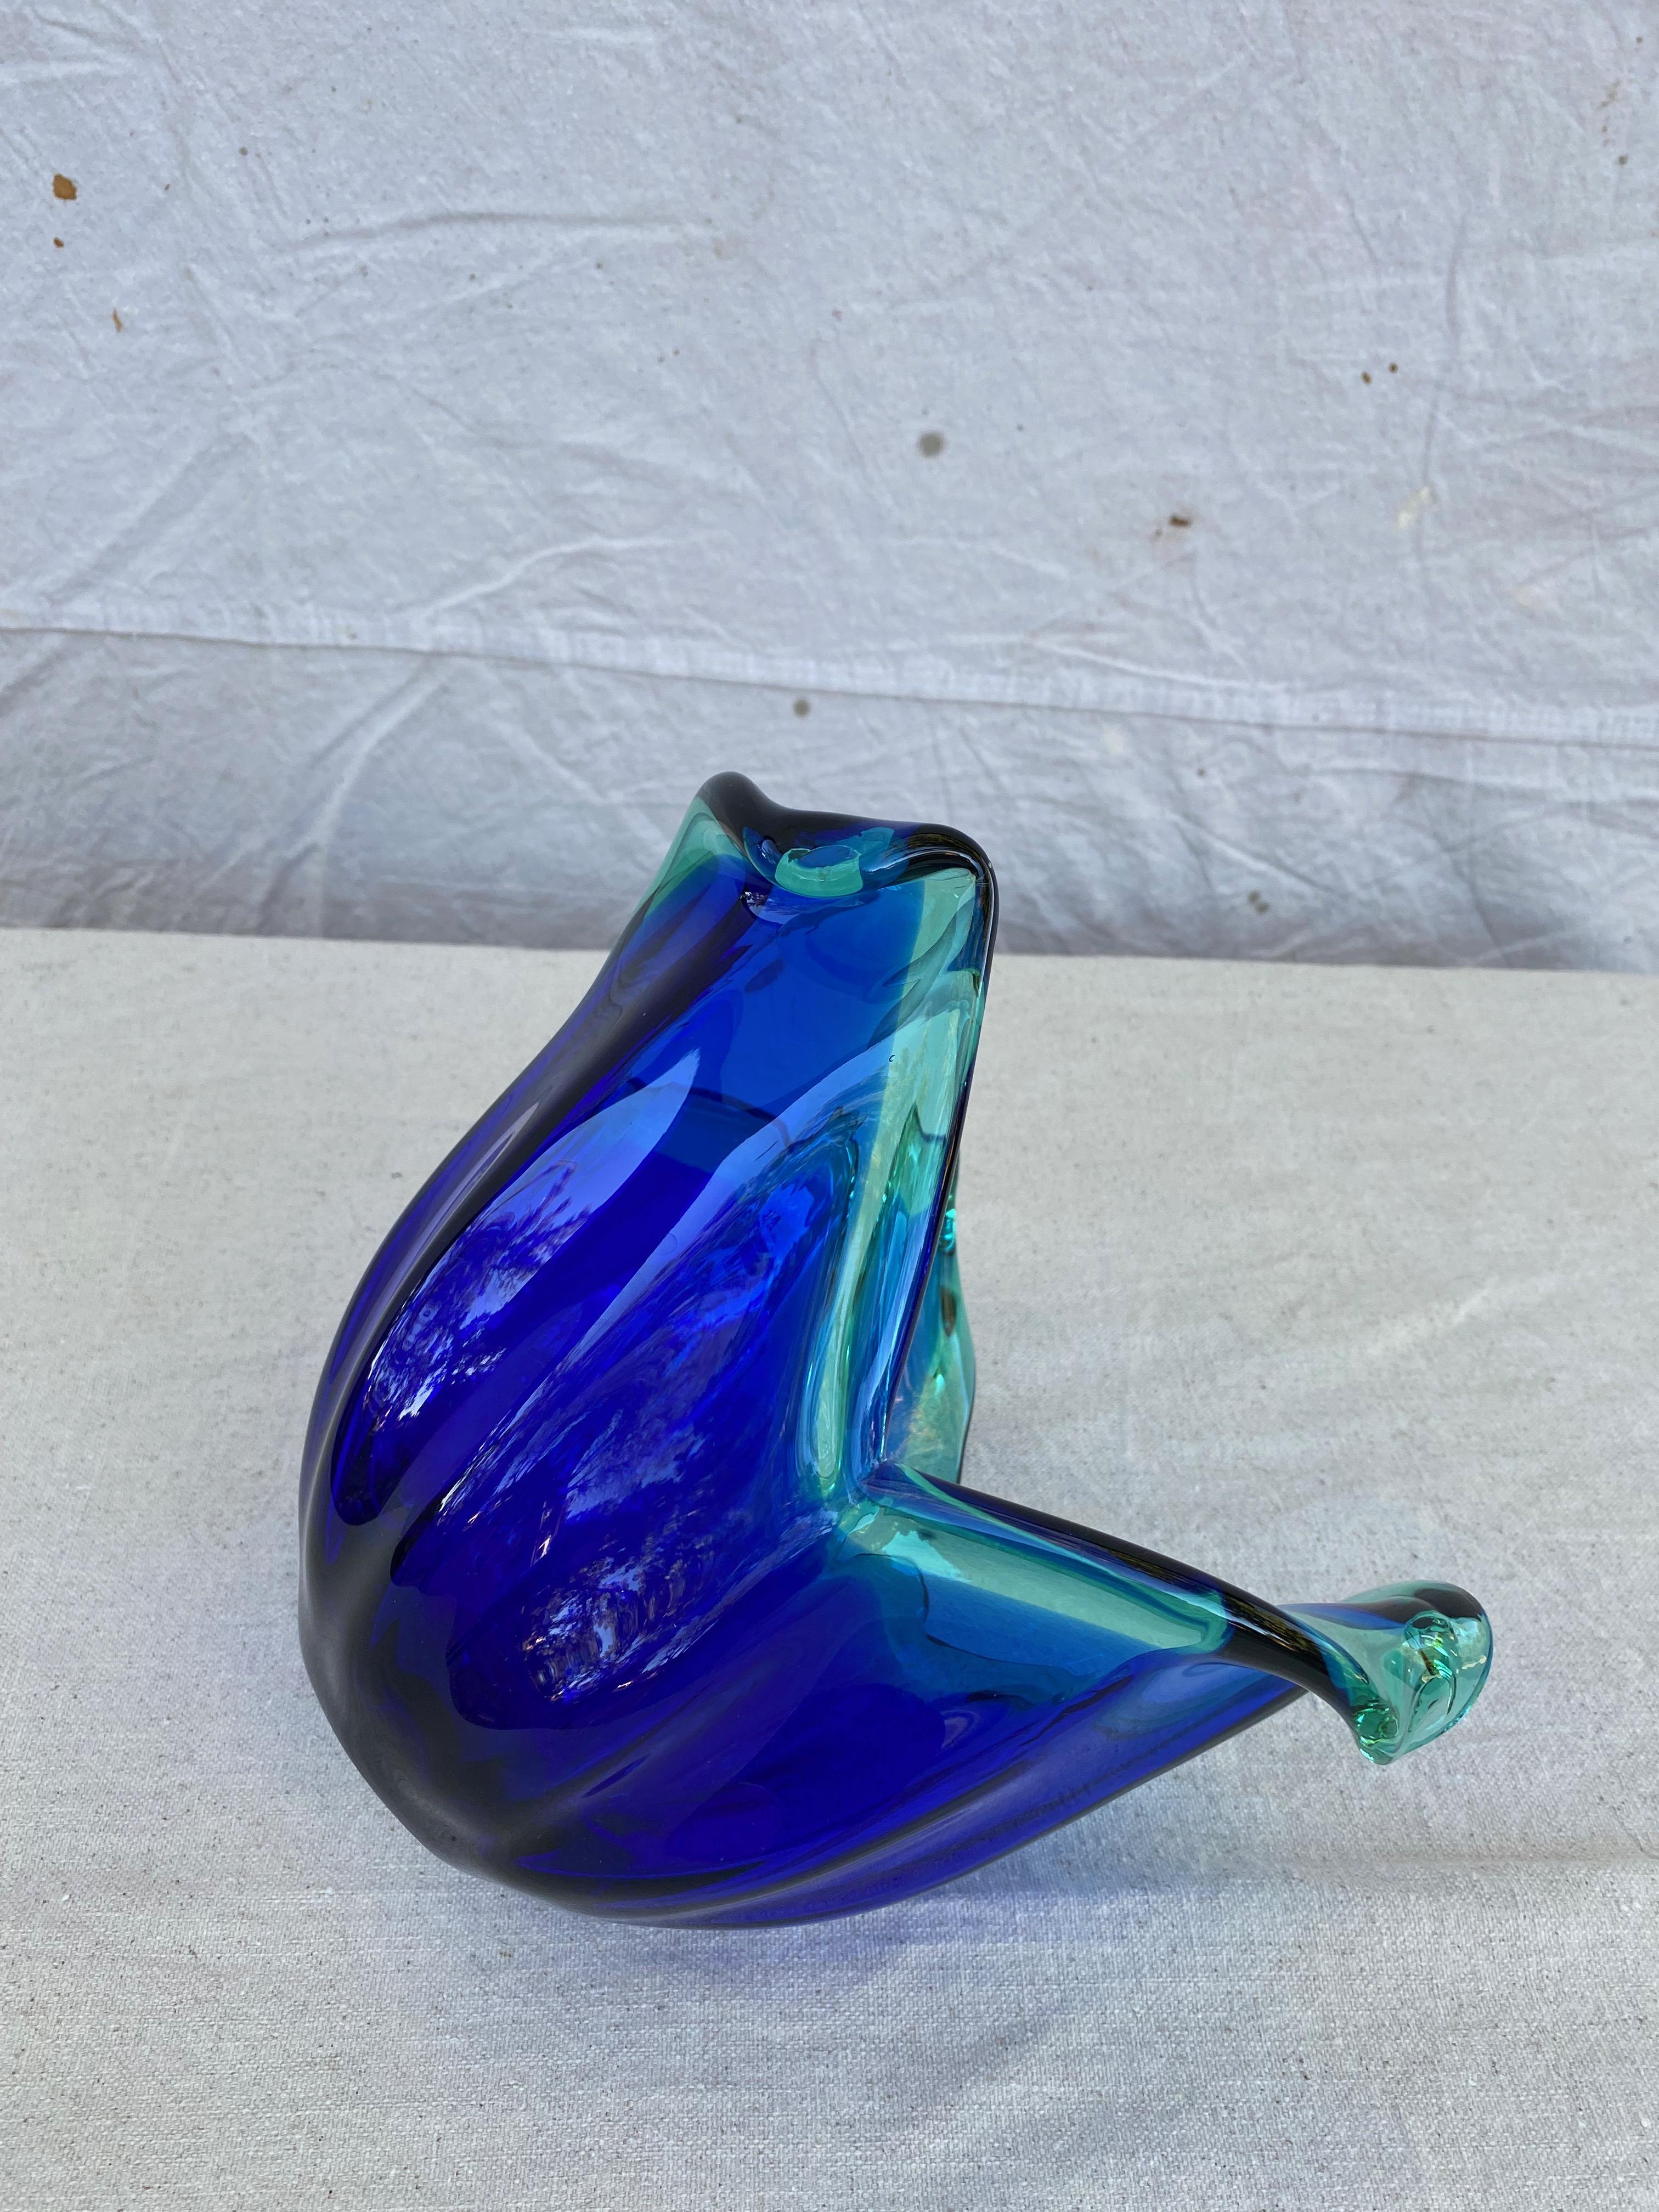 1960s Blue Murano with Teal Green Accents Vase 1